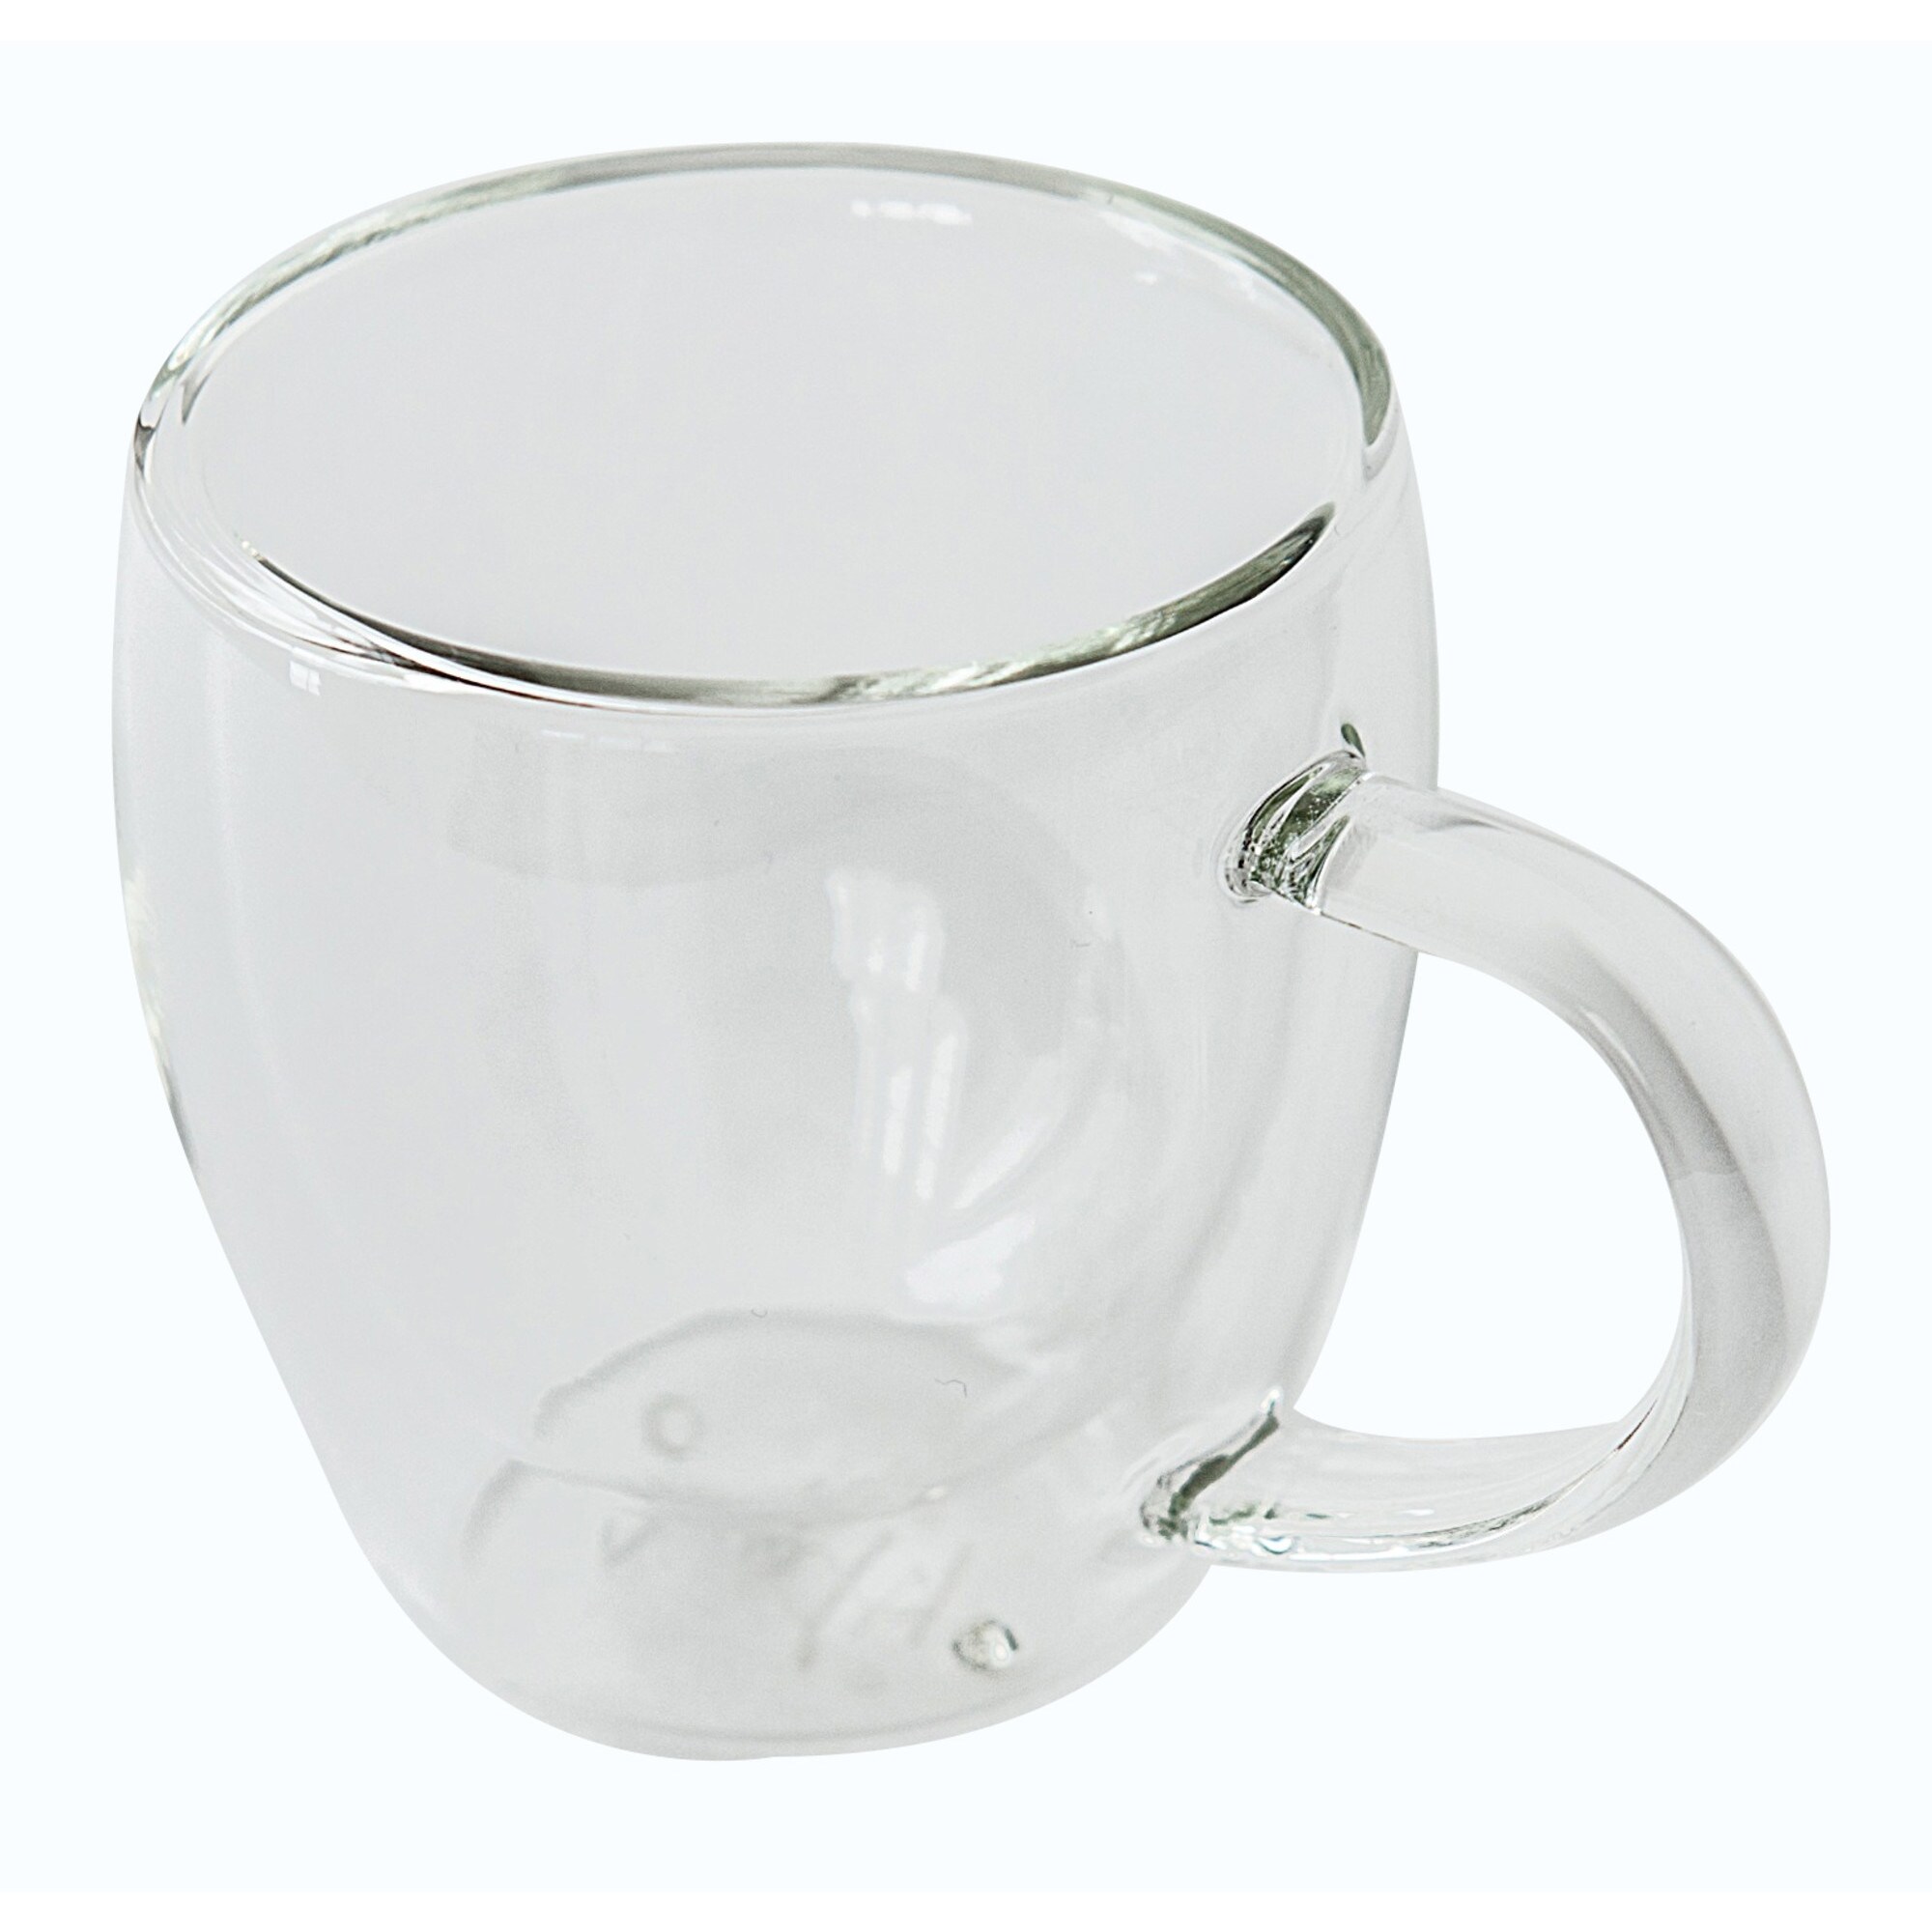 JavaFly Bistro 12 oz. Double Wall Glass with Handle Dishwasher Safe